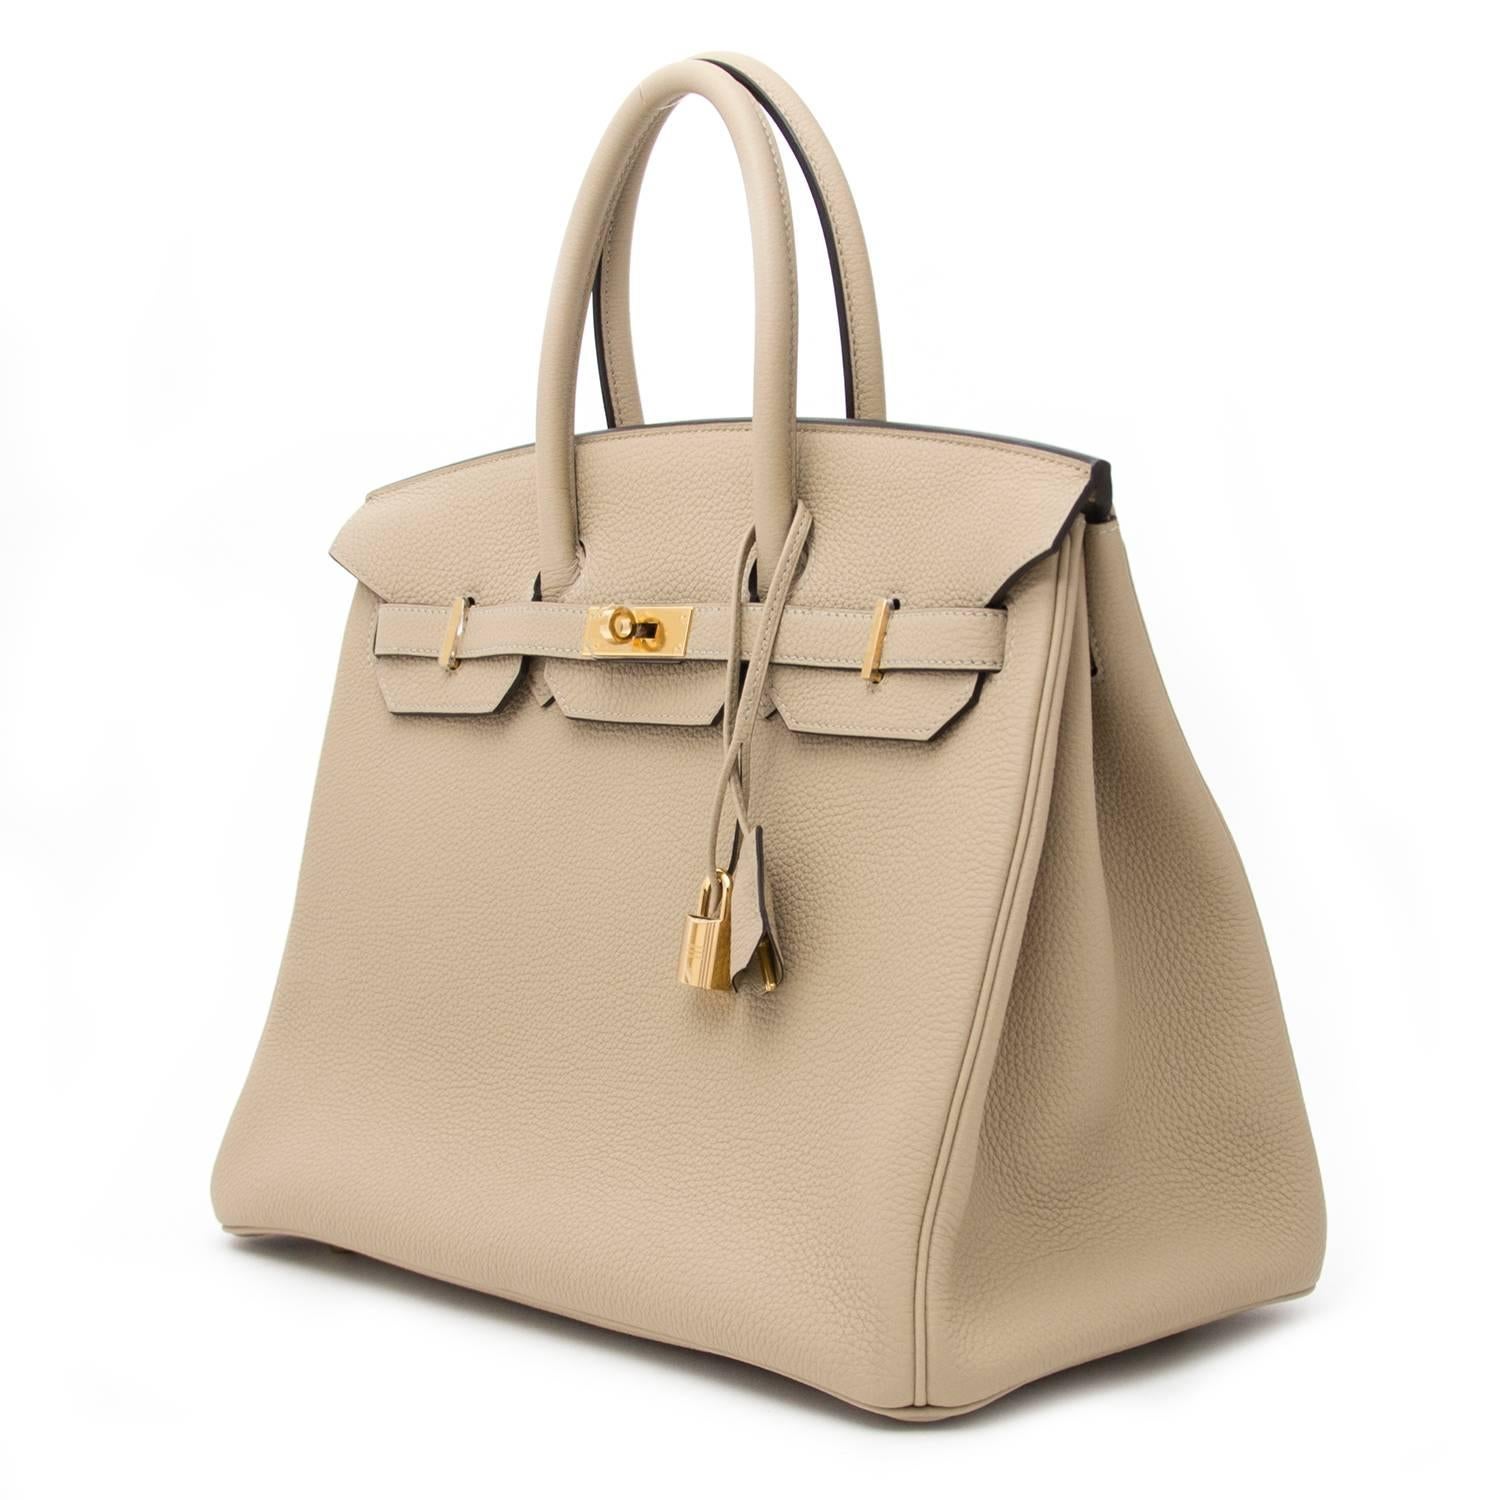 Skip the waitinglist, Brand new Birkin made out of the popular Togo leather in beautiful new beige 